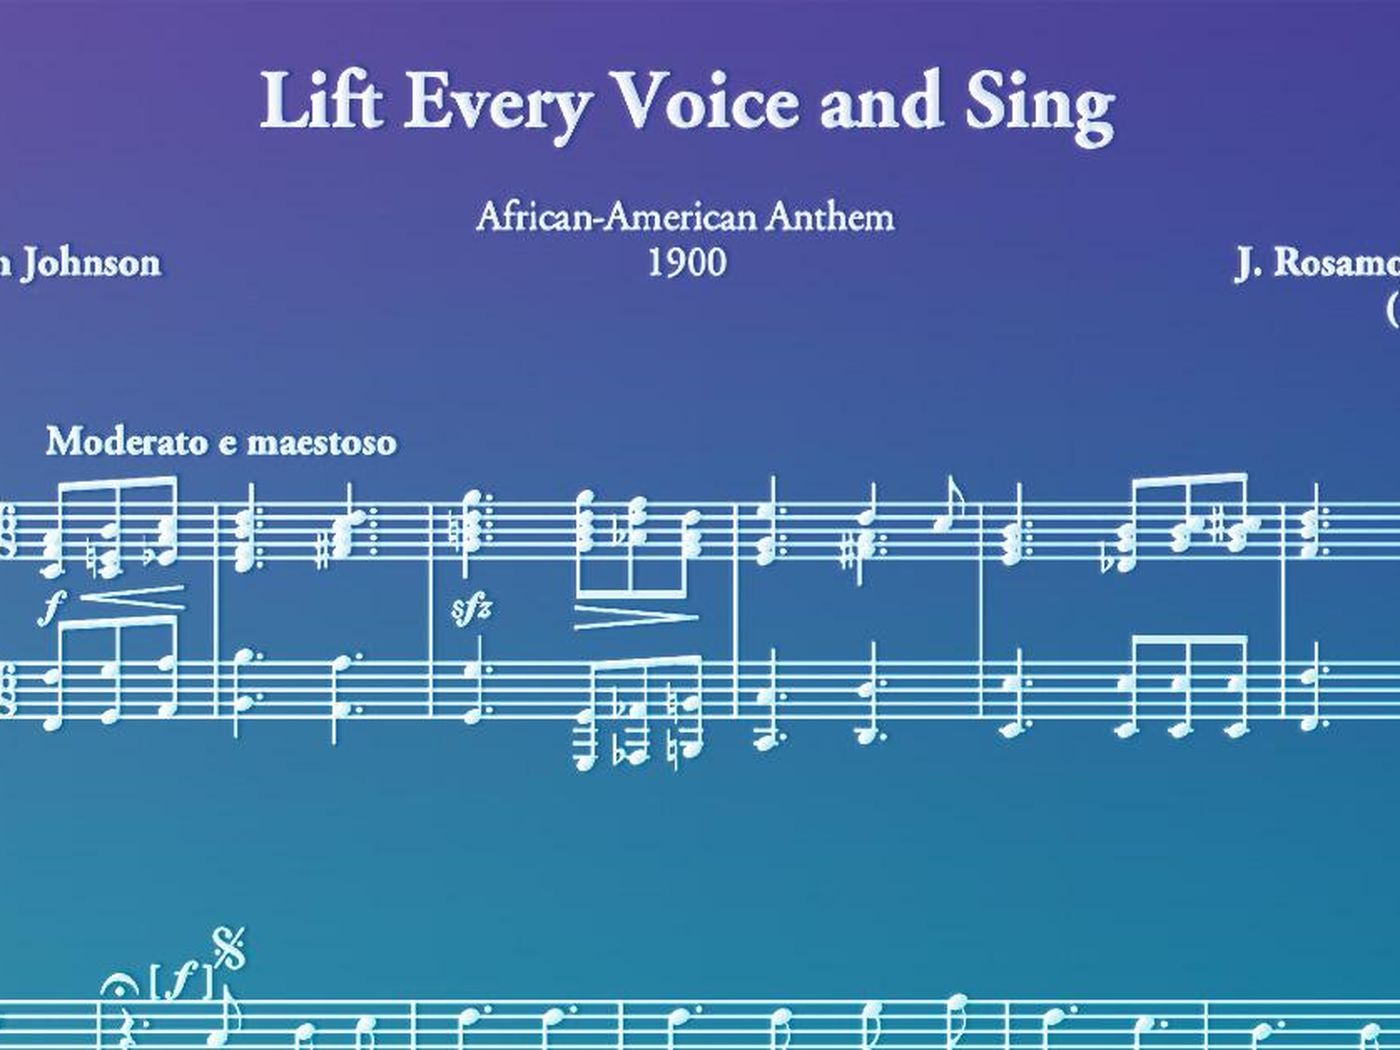 Lift Every Voice and Sing sheet music (main longform)